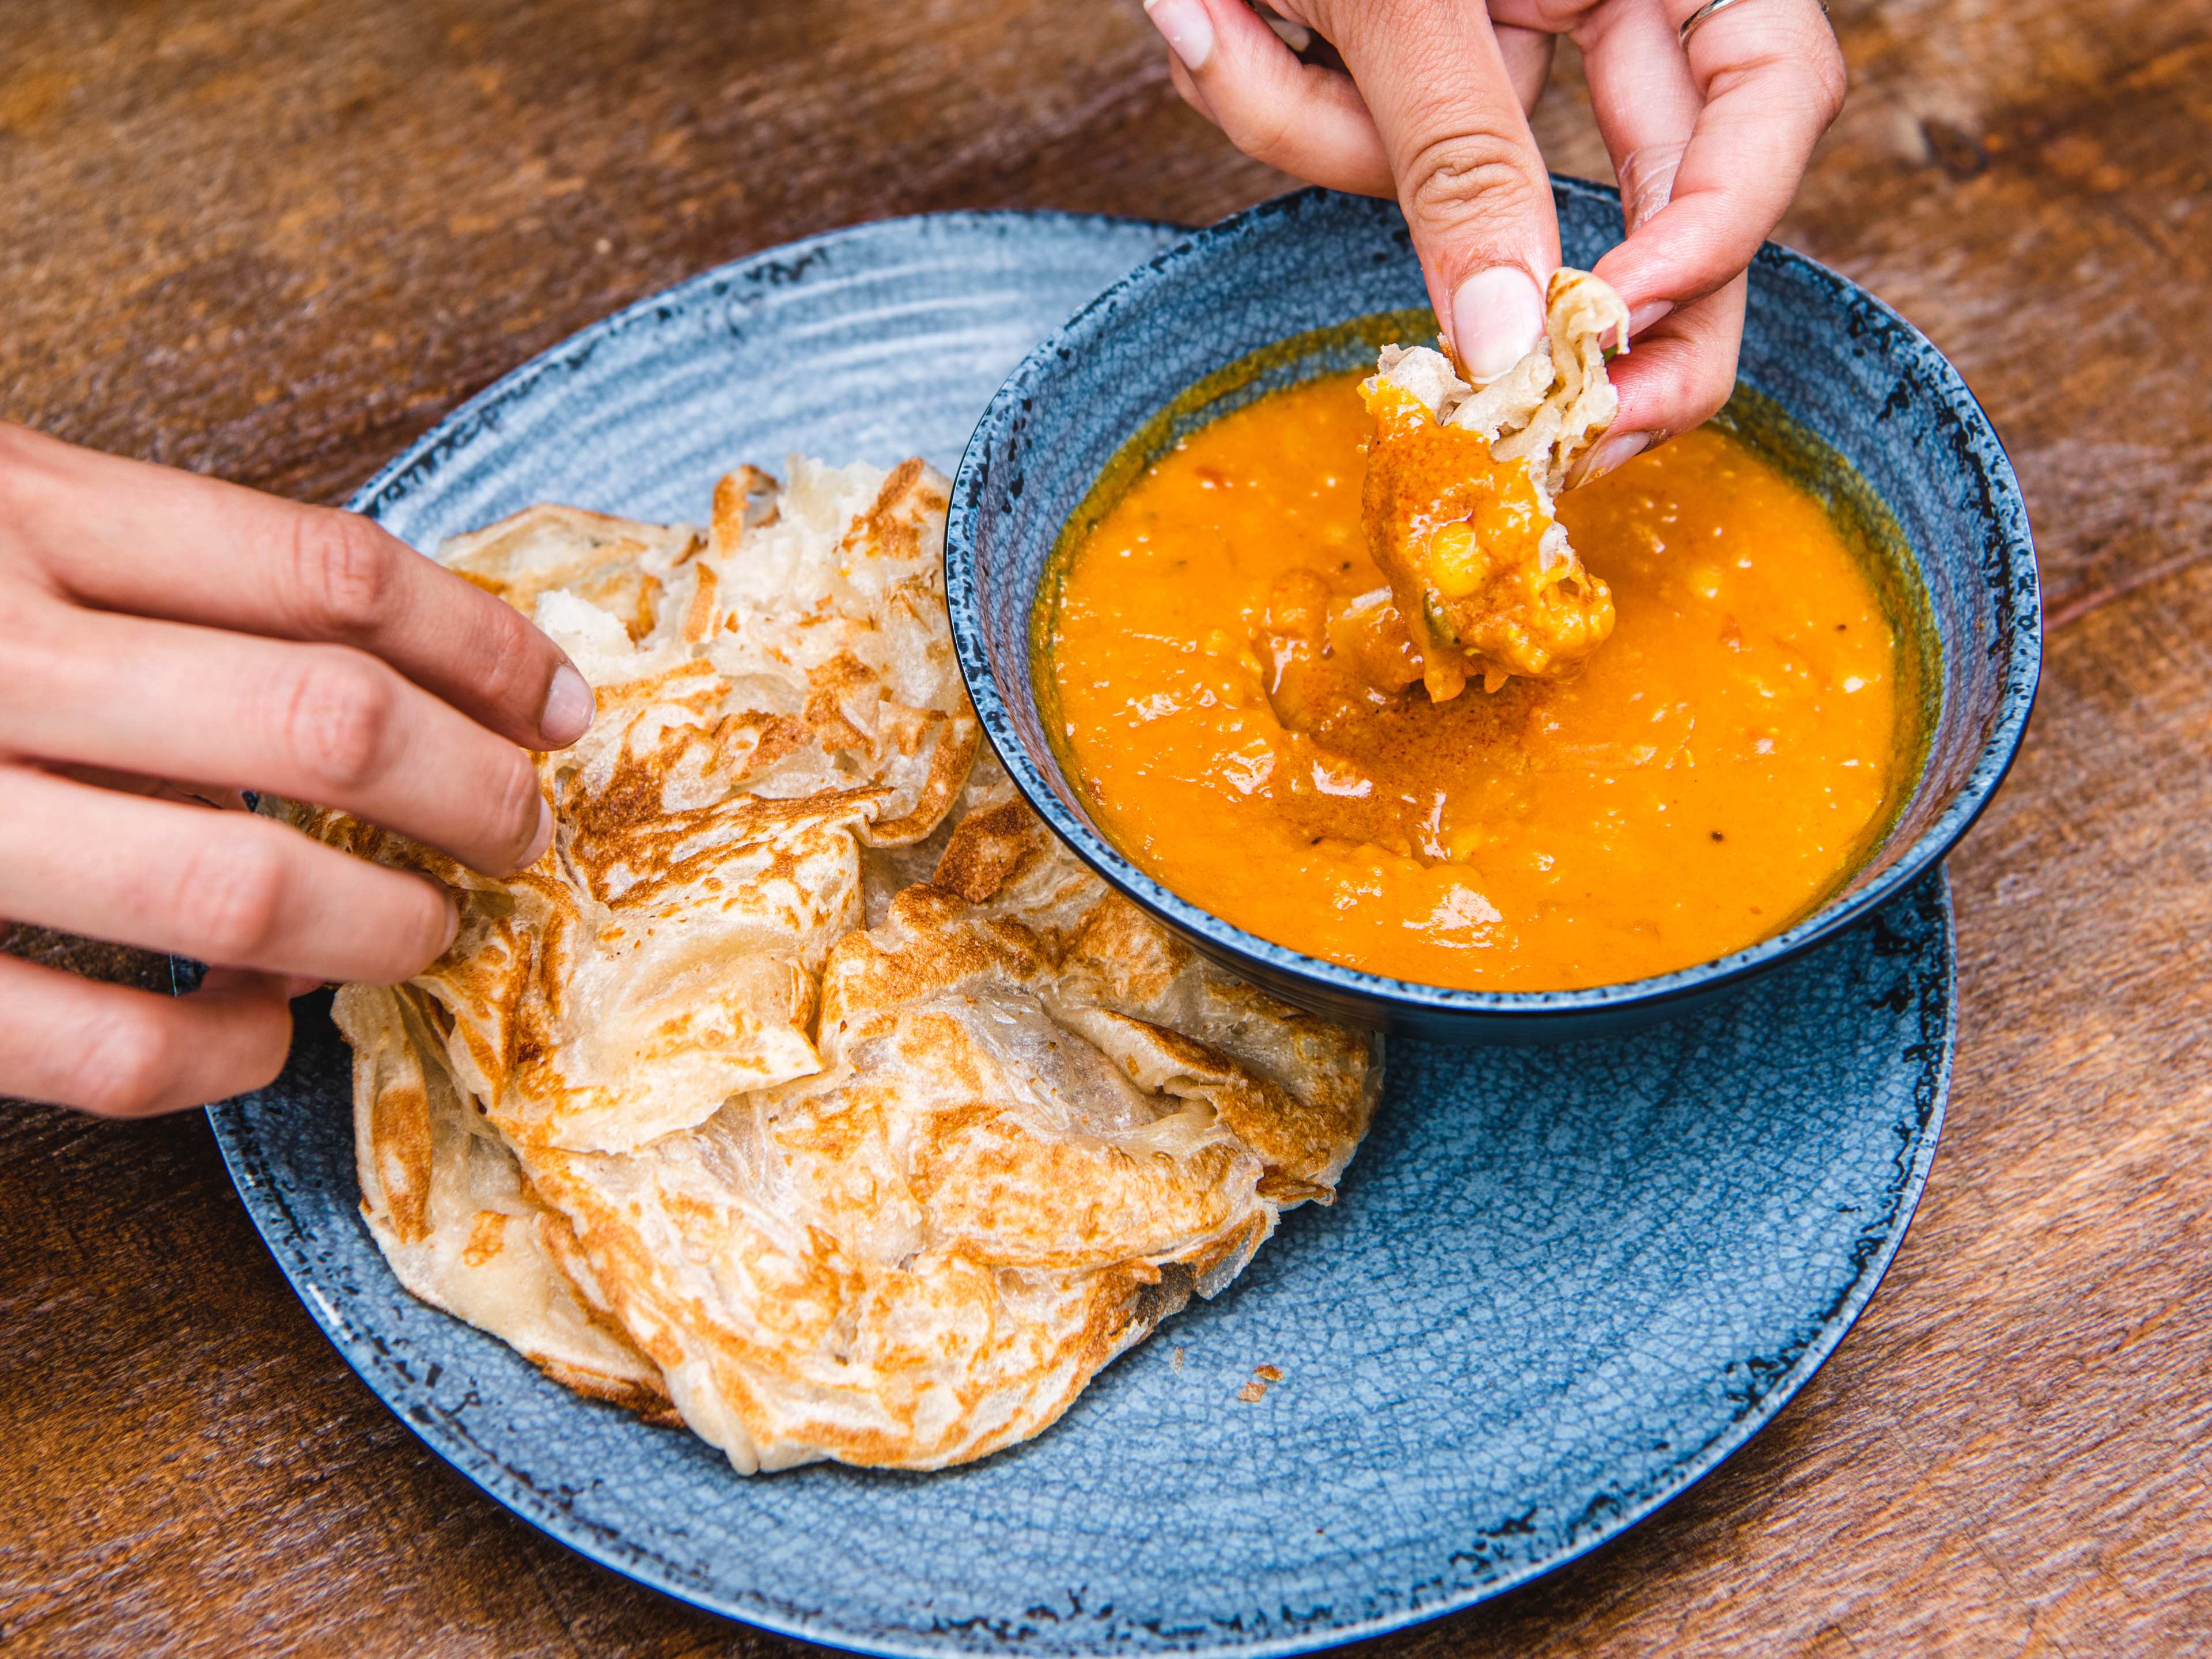 The roti canai with dhal from Roti King.